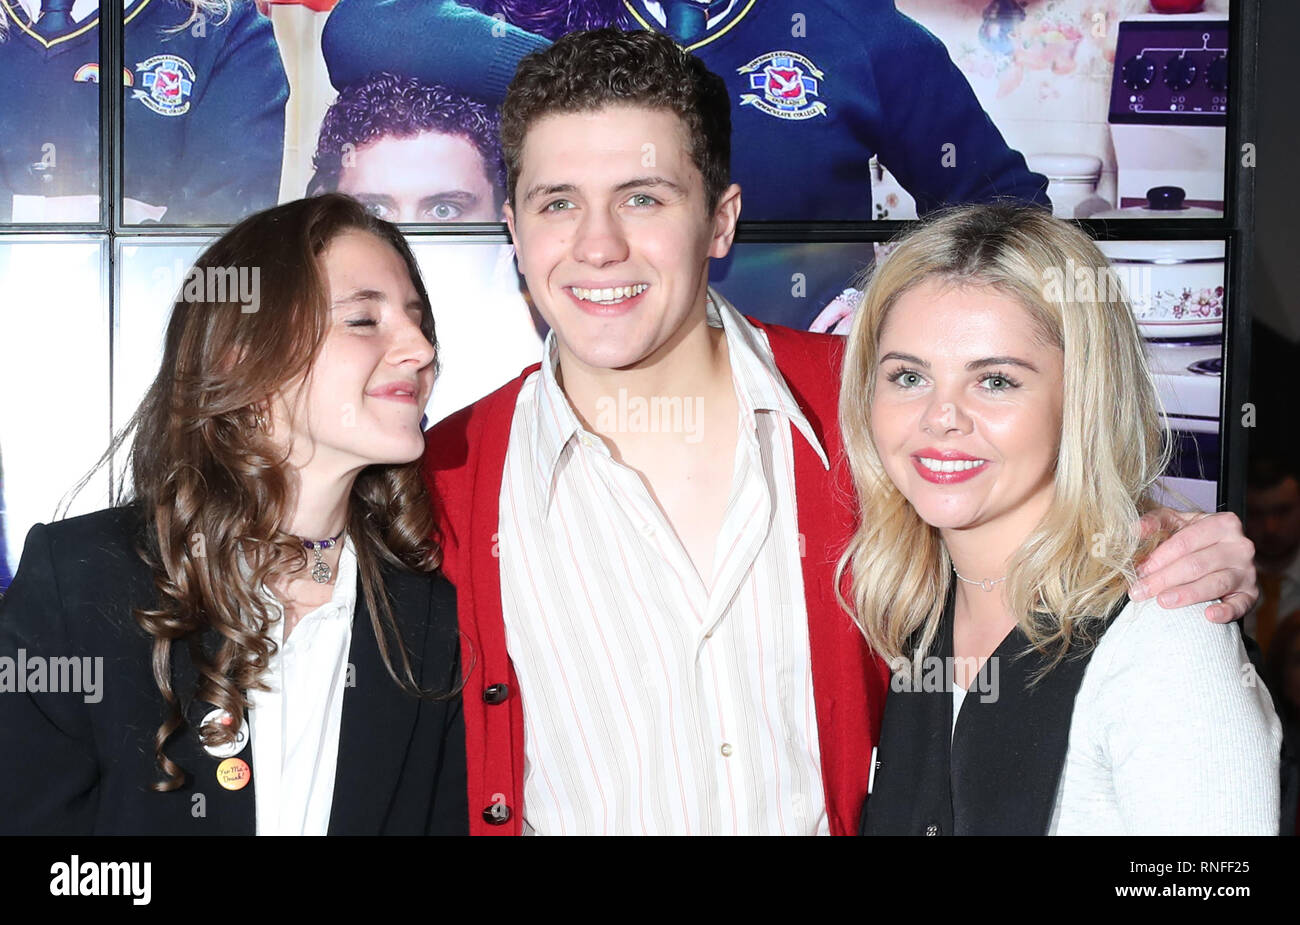 (left to right) Louisa Harland, Dylan Llewellyn and Saoirse-Monica Jackson arrive at the Omniplex Cinema in Londonderry for the Derry Girls premiere ahead of the broadcast of the second series on Channel 4. Stock Photo